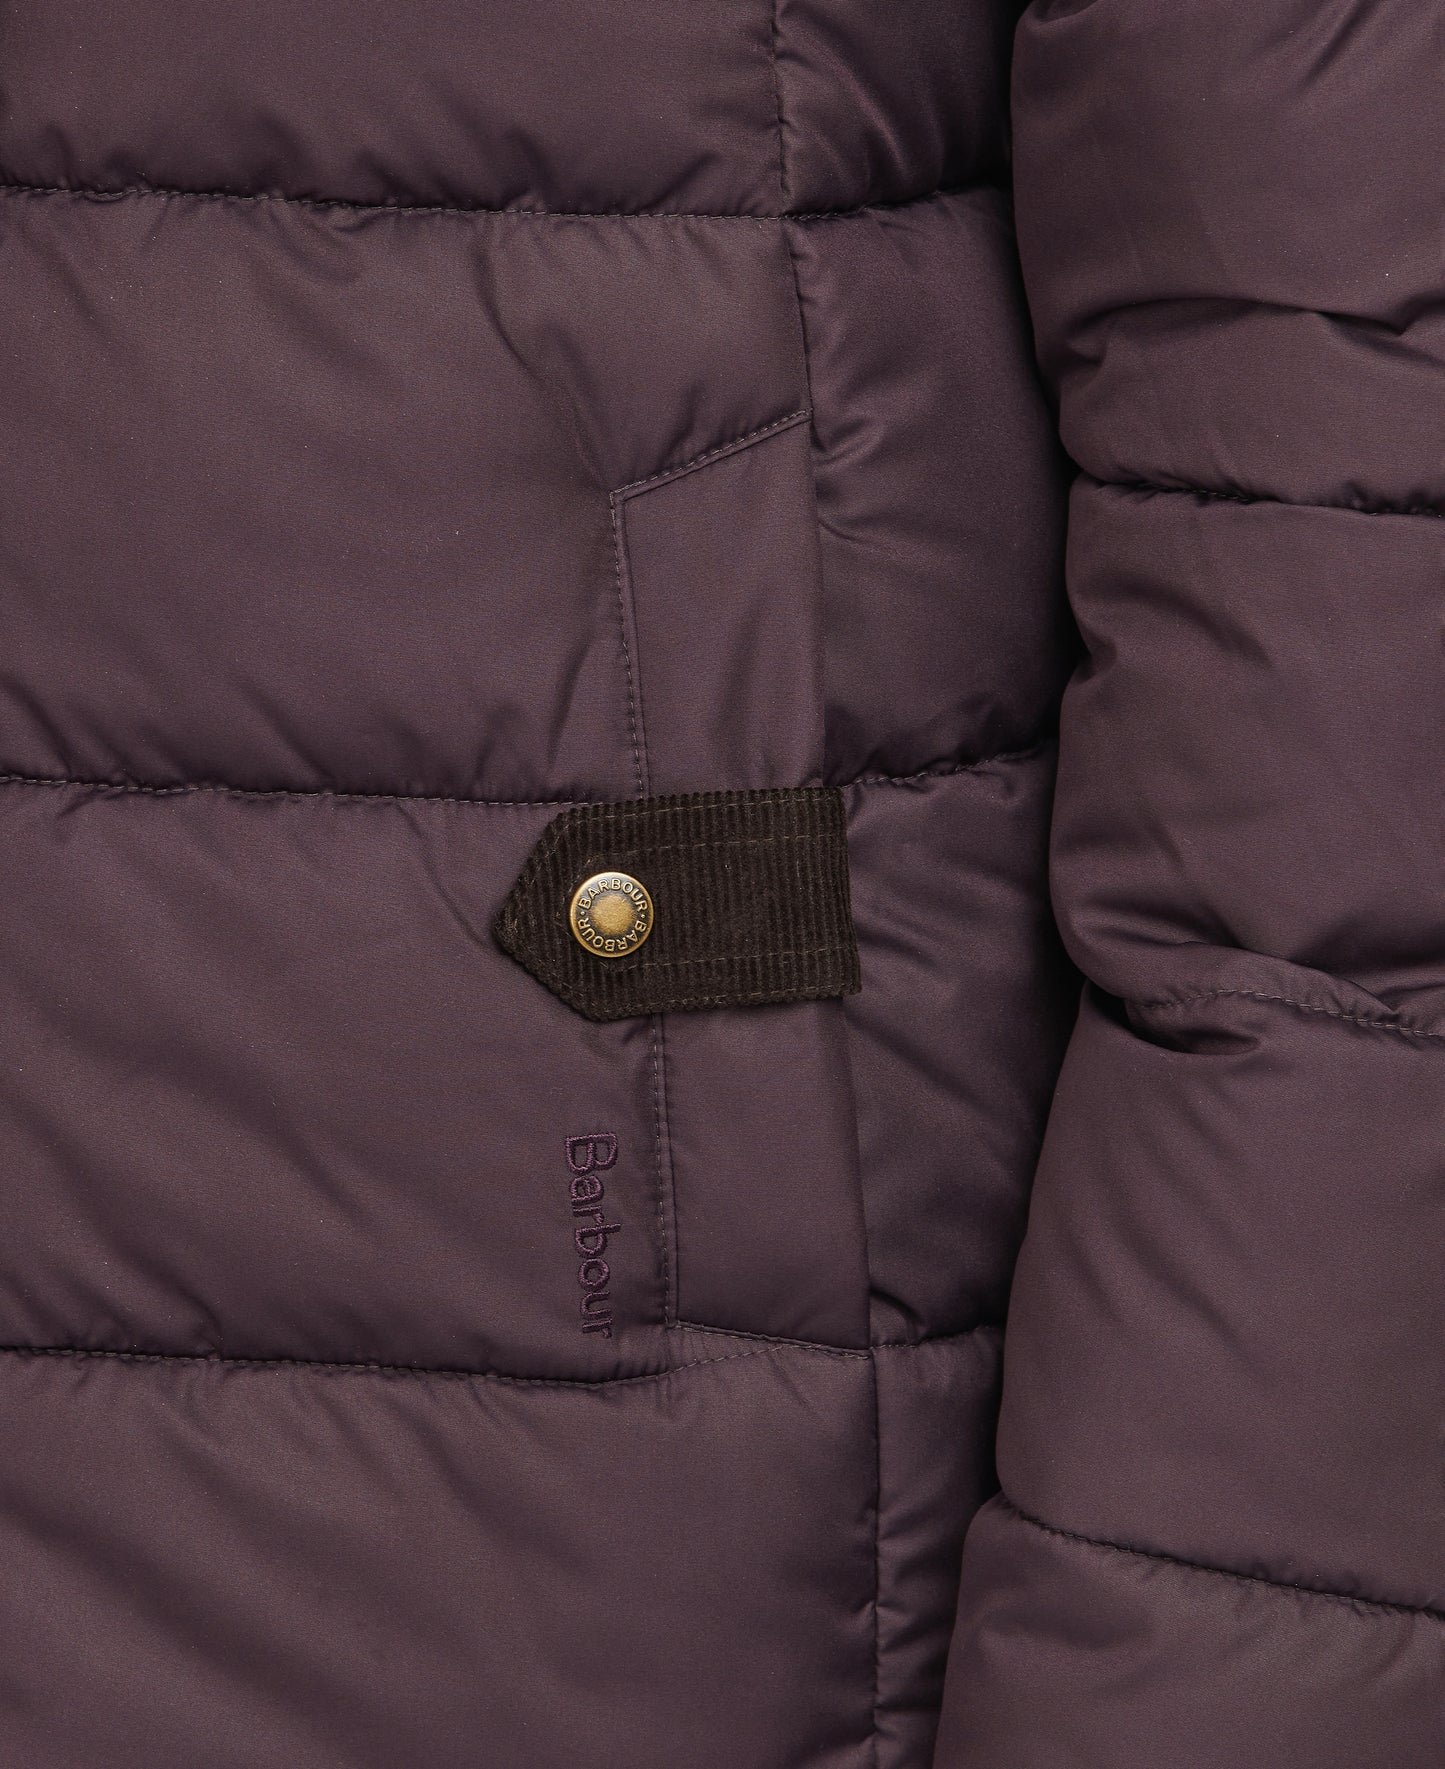 Barbour Hawk Quilted Jacket